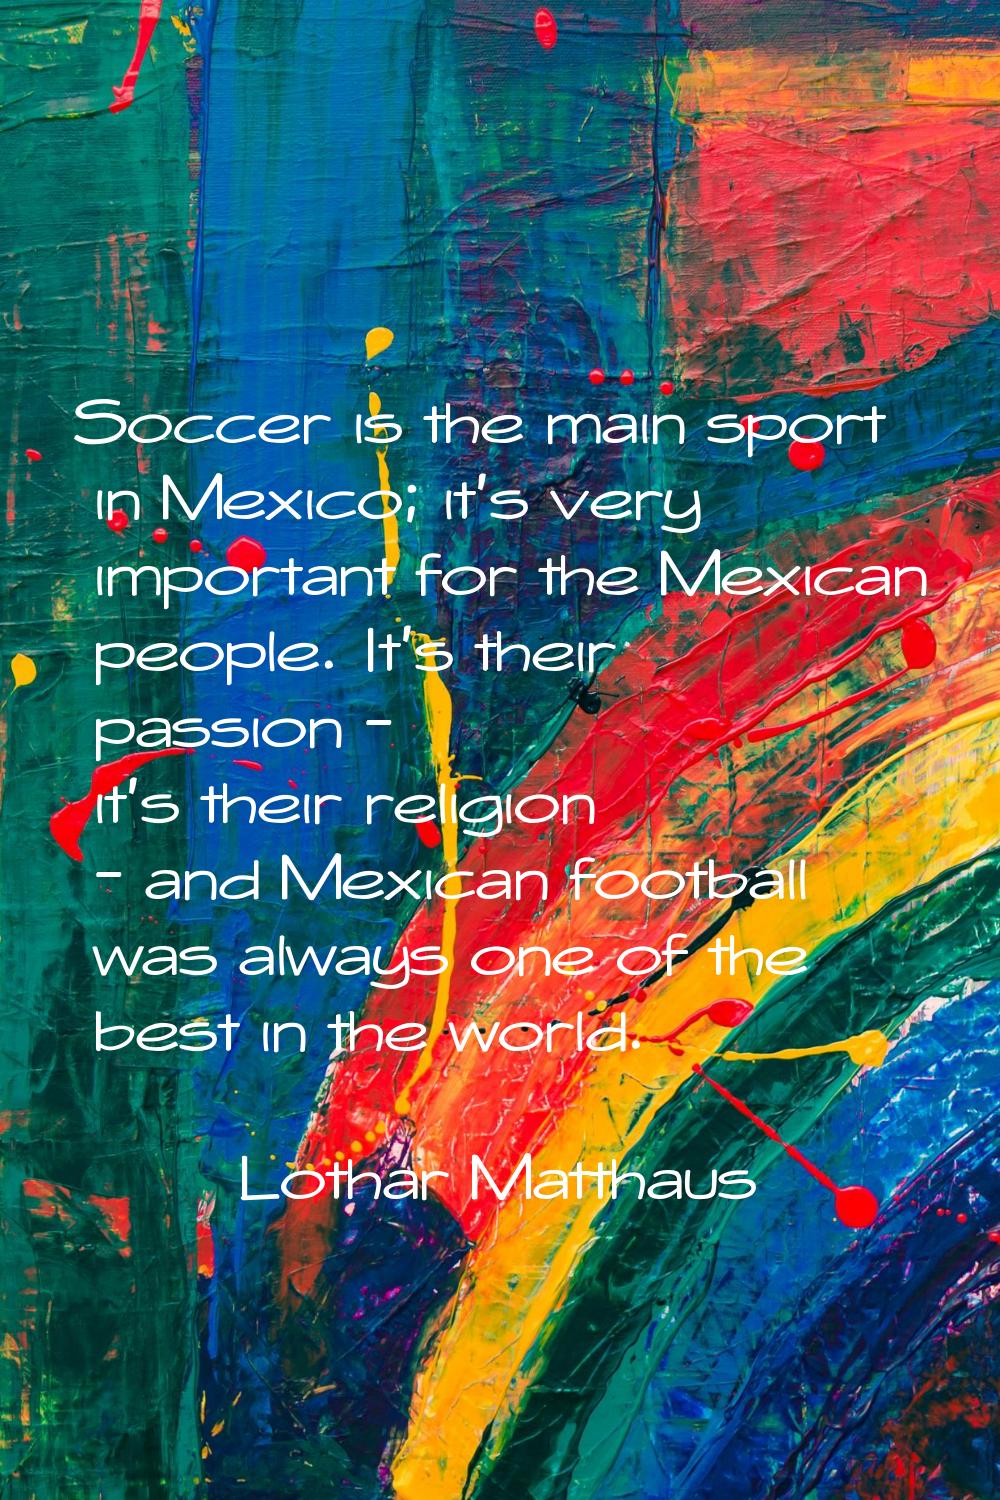 Soccer is the main sport in Mexico; it's very important for the Mexican people. It's their passion 